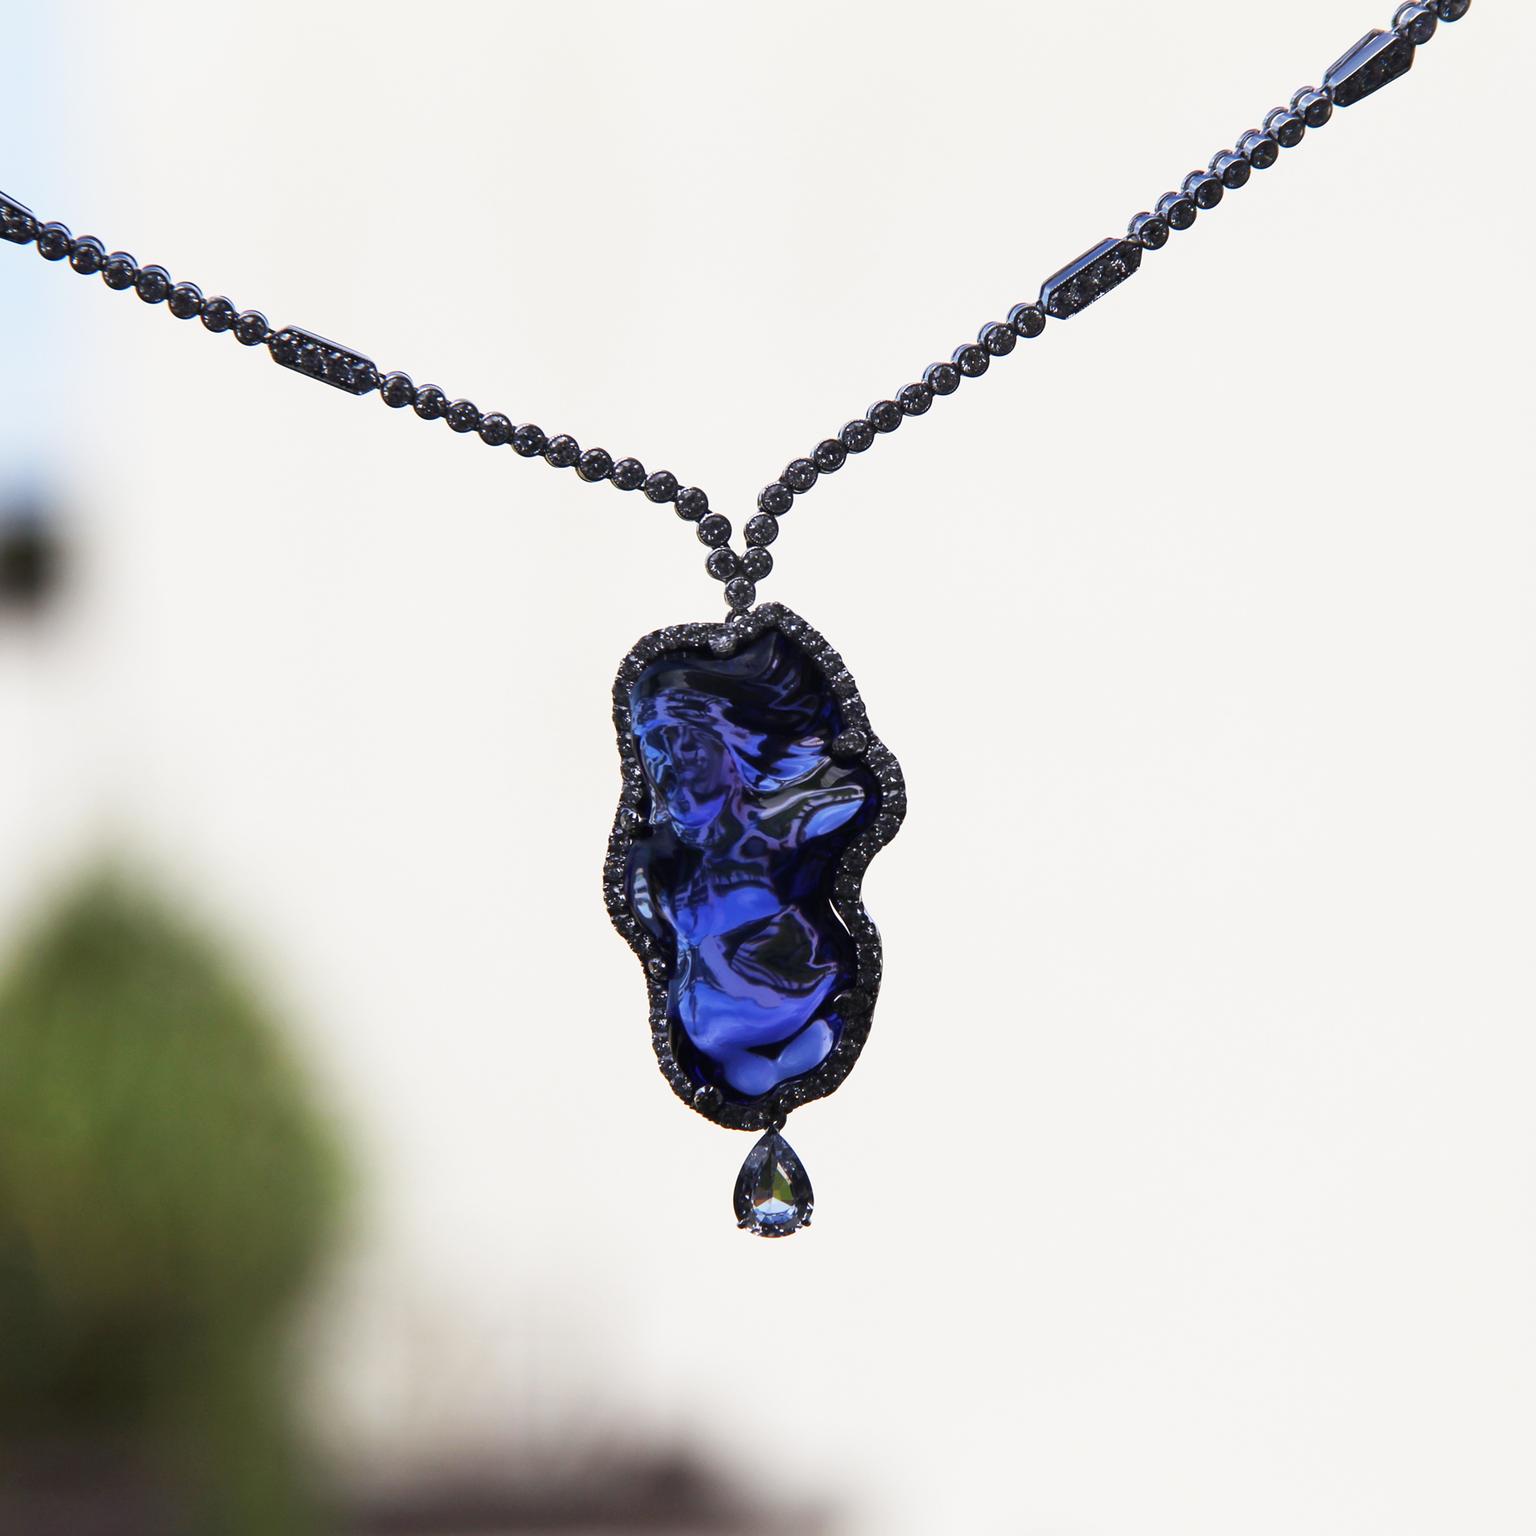 Baroque tanzanite necklace | Moussaieff | The Jewellery Editor